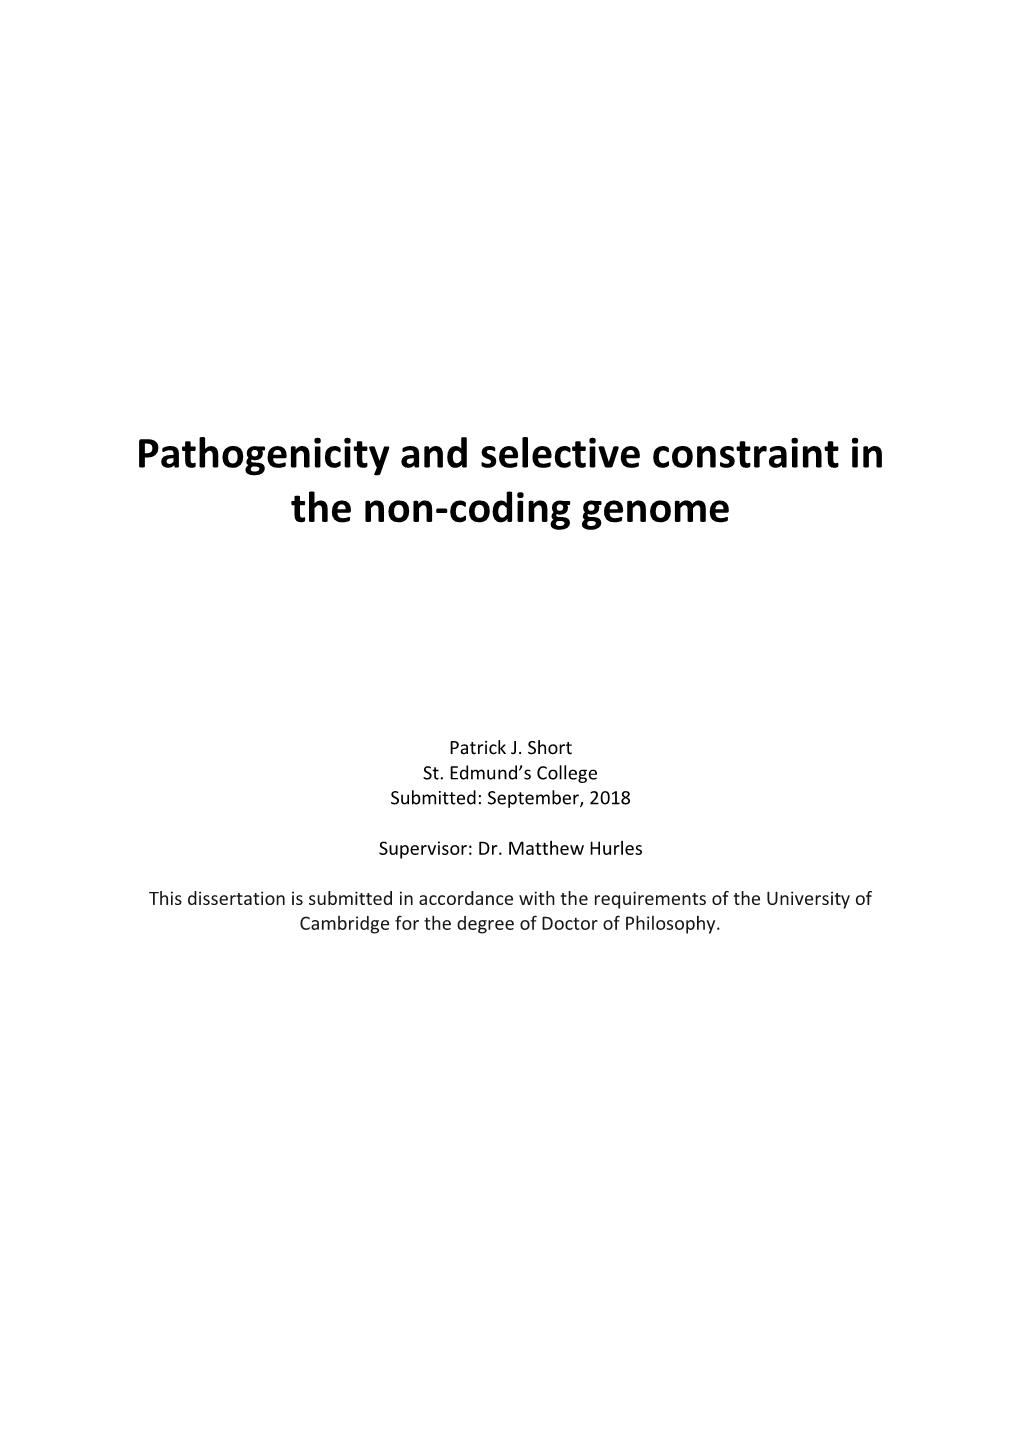 Pathogenicity and Selective Constraint in the Non-Coding Genome